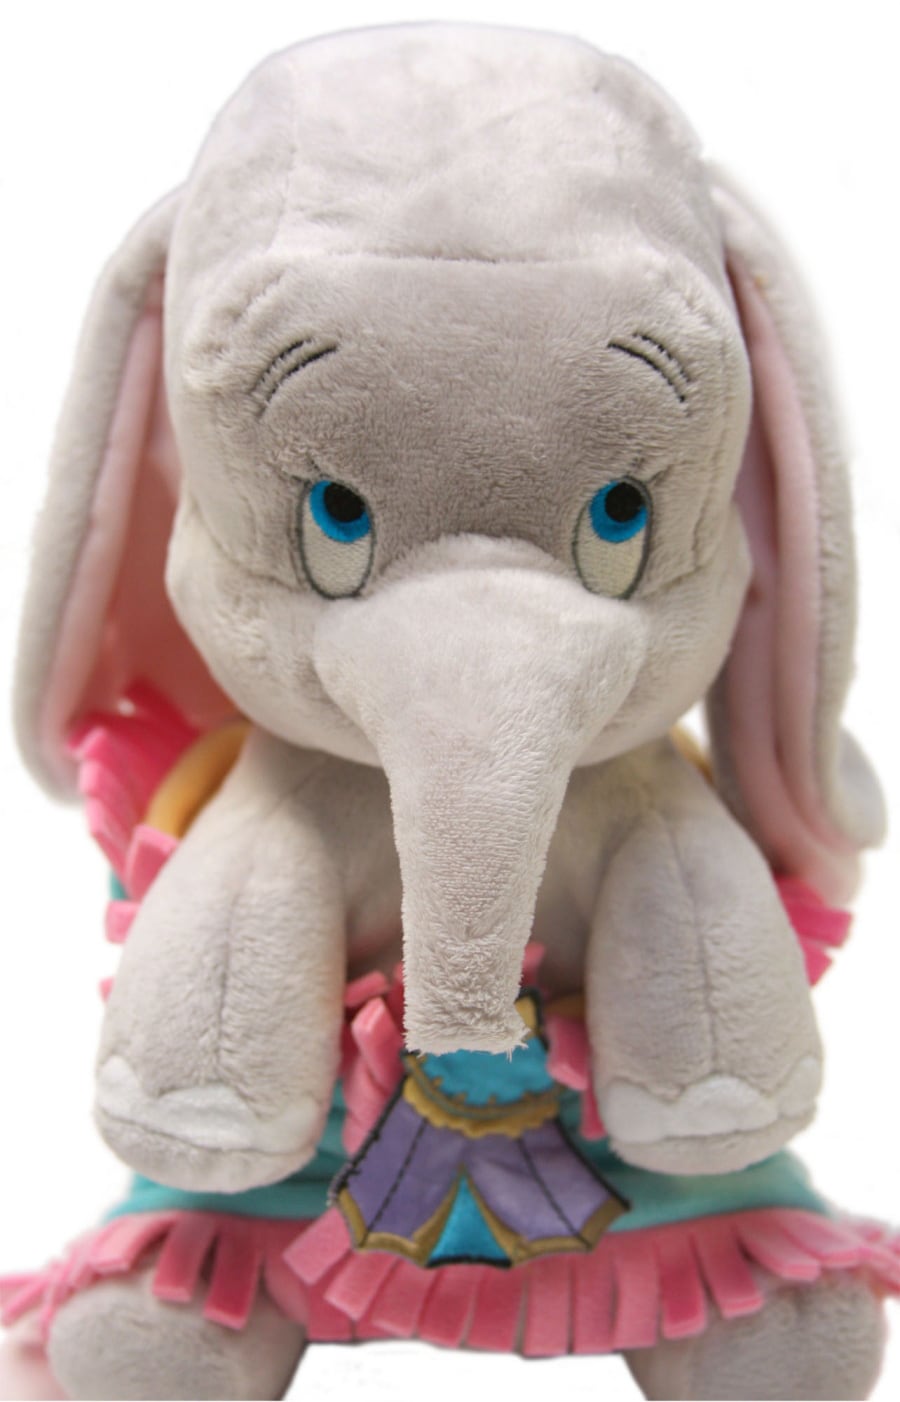 disney's babies plush doll and blanket